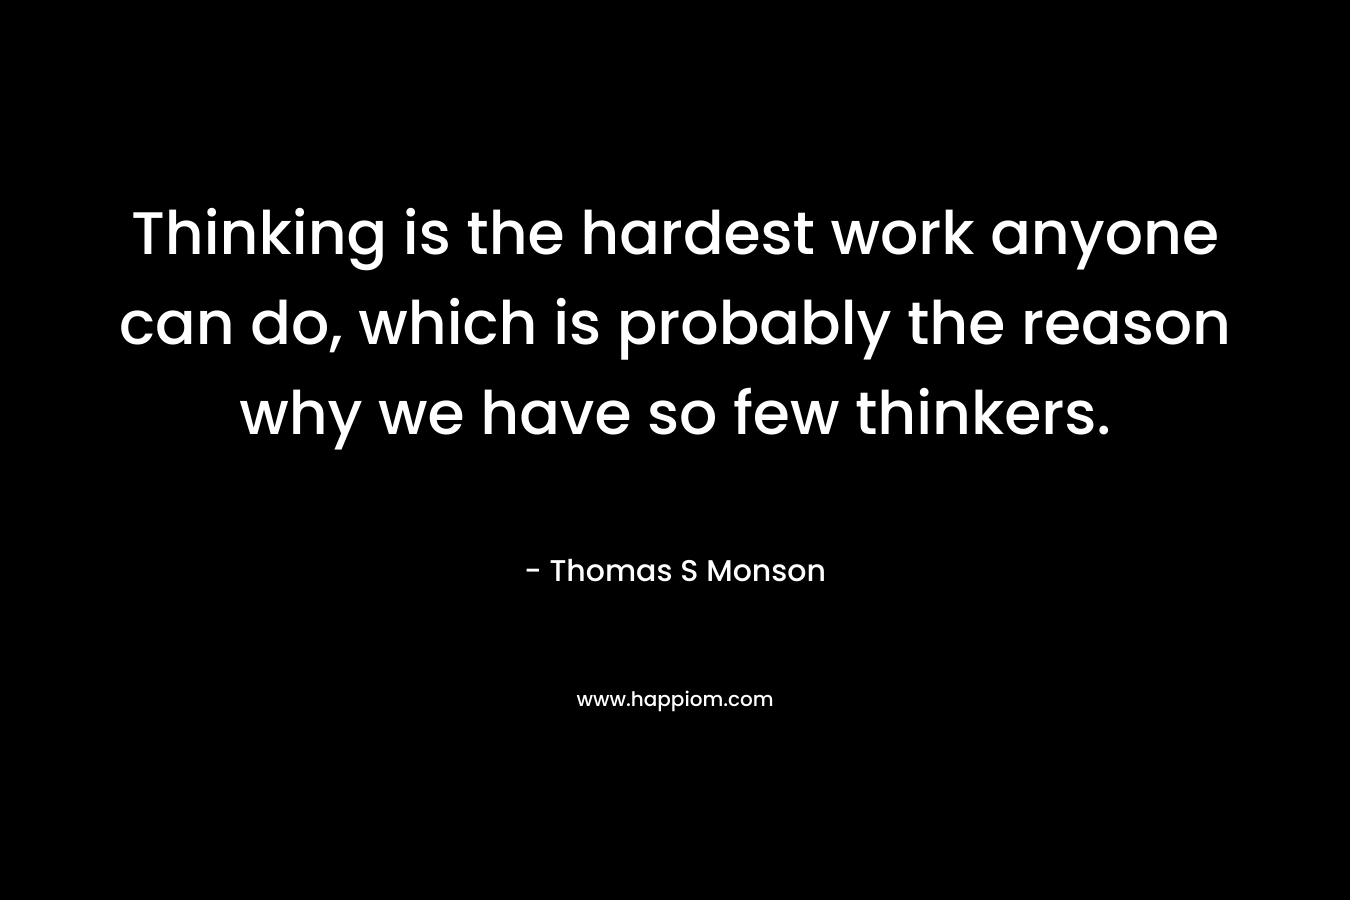 Thinking is the hardest work anyone can do, which is probably the reason why we have so few thinkers. 